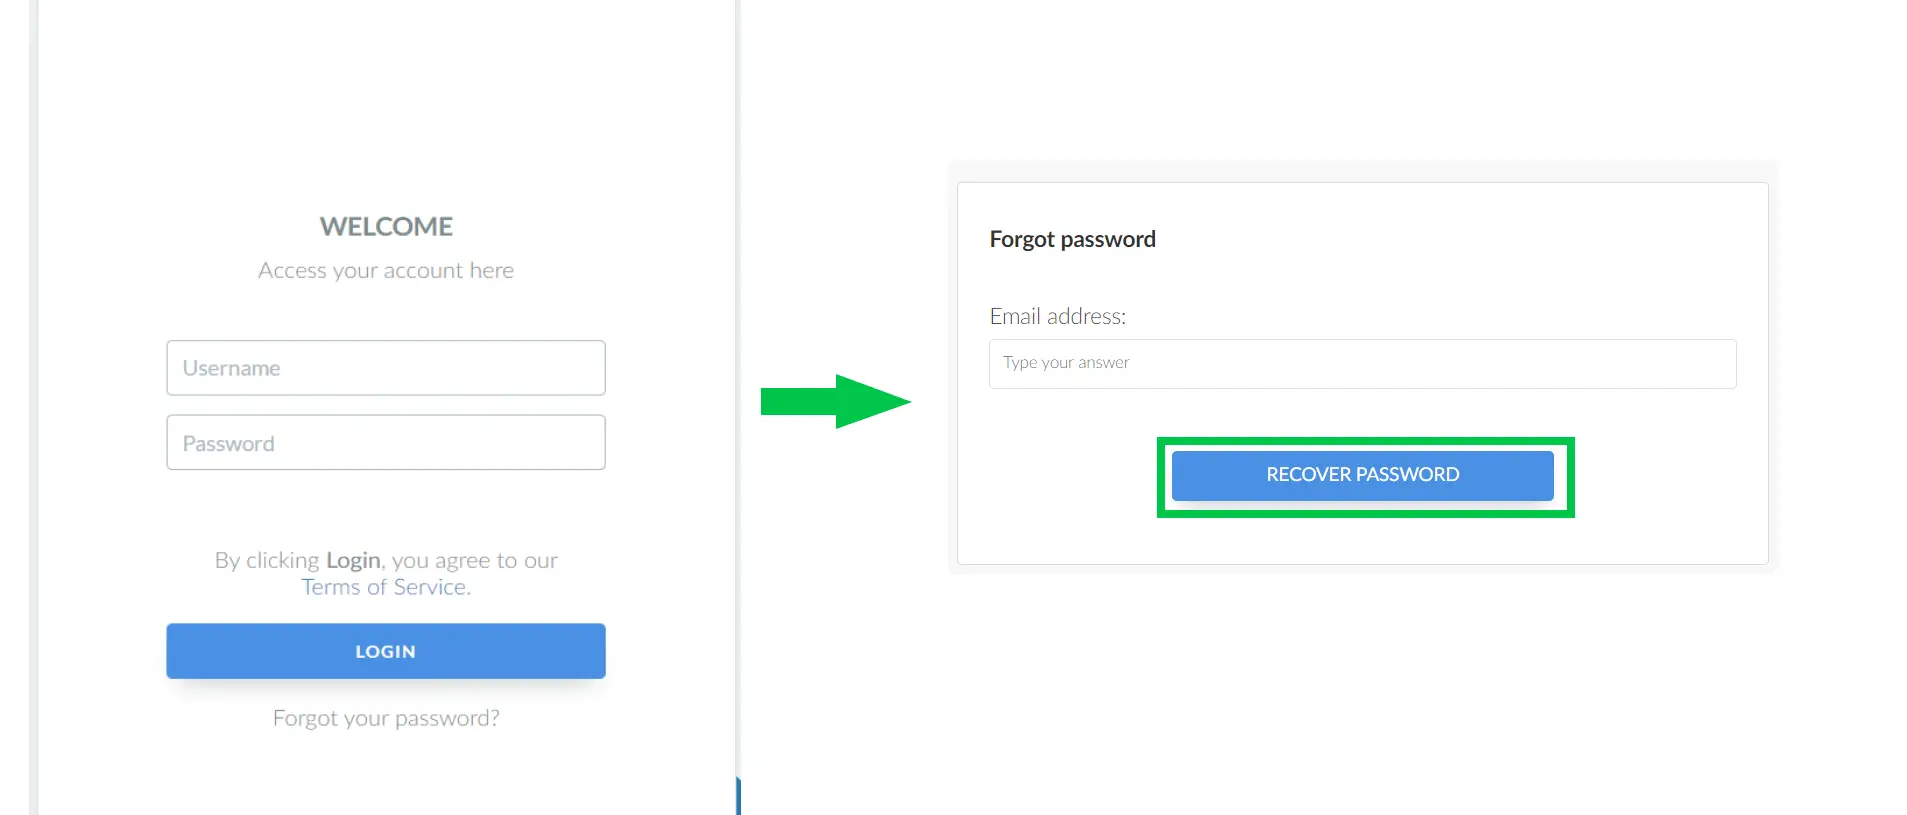 Image showing how to recover password